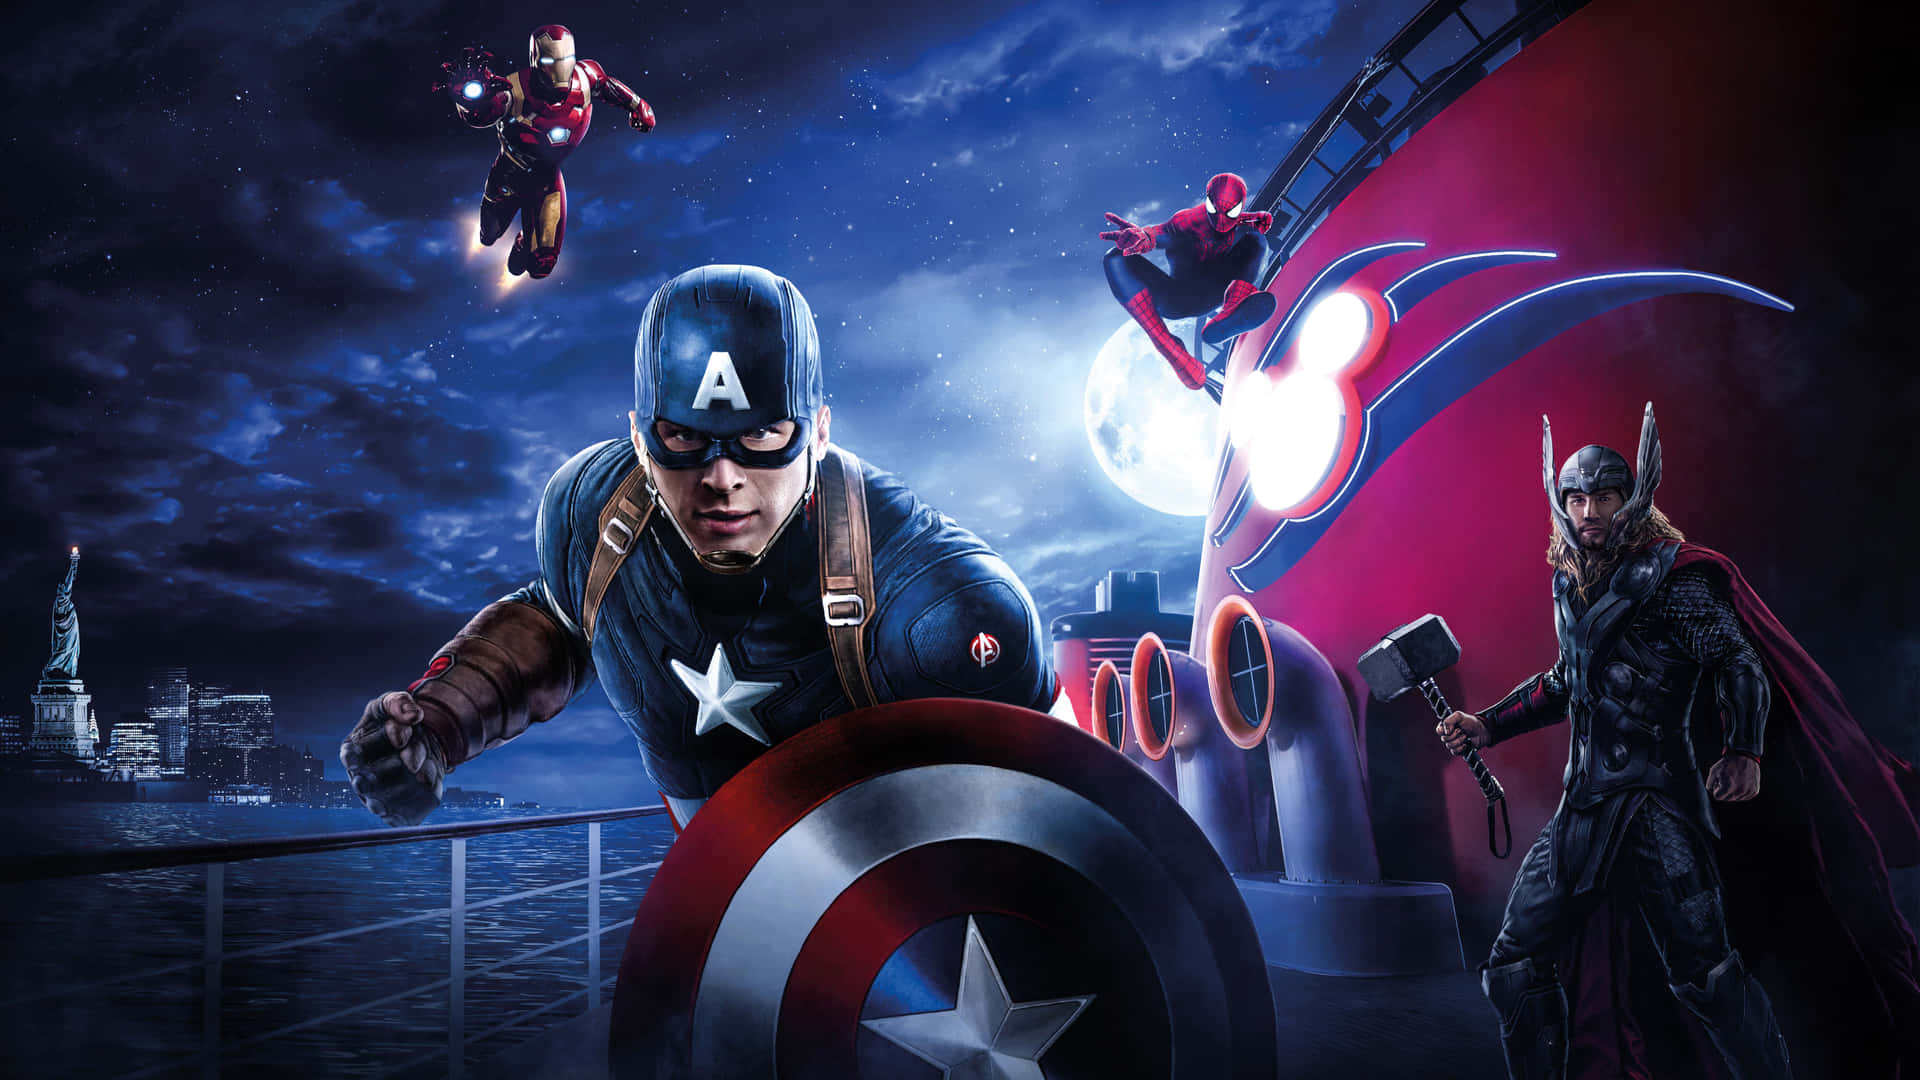 Charge into action with this striking Captain America desktop wallpaper. Wallpaper